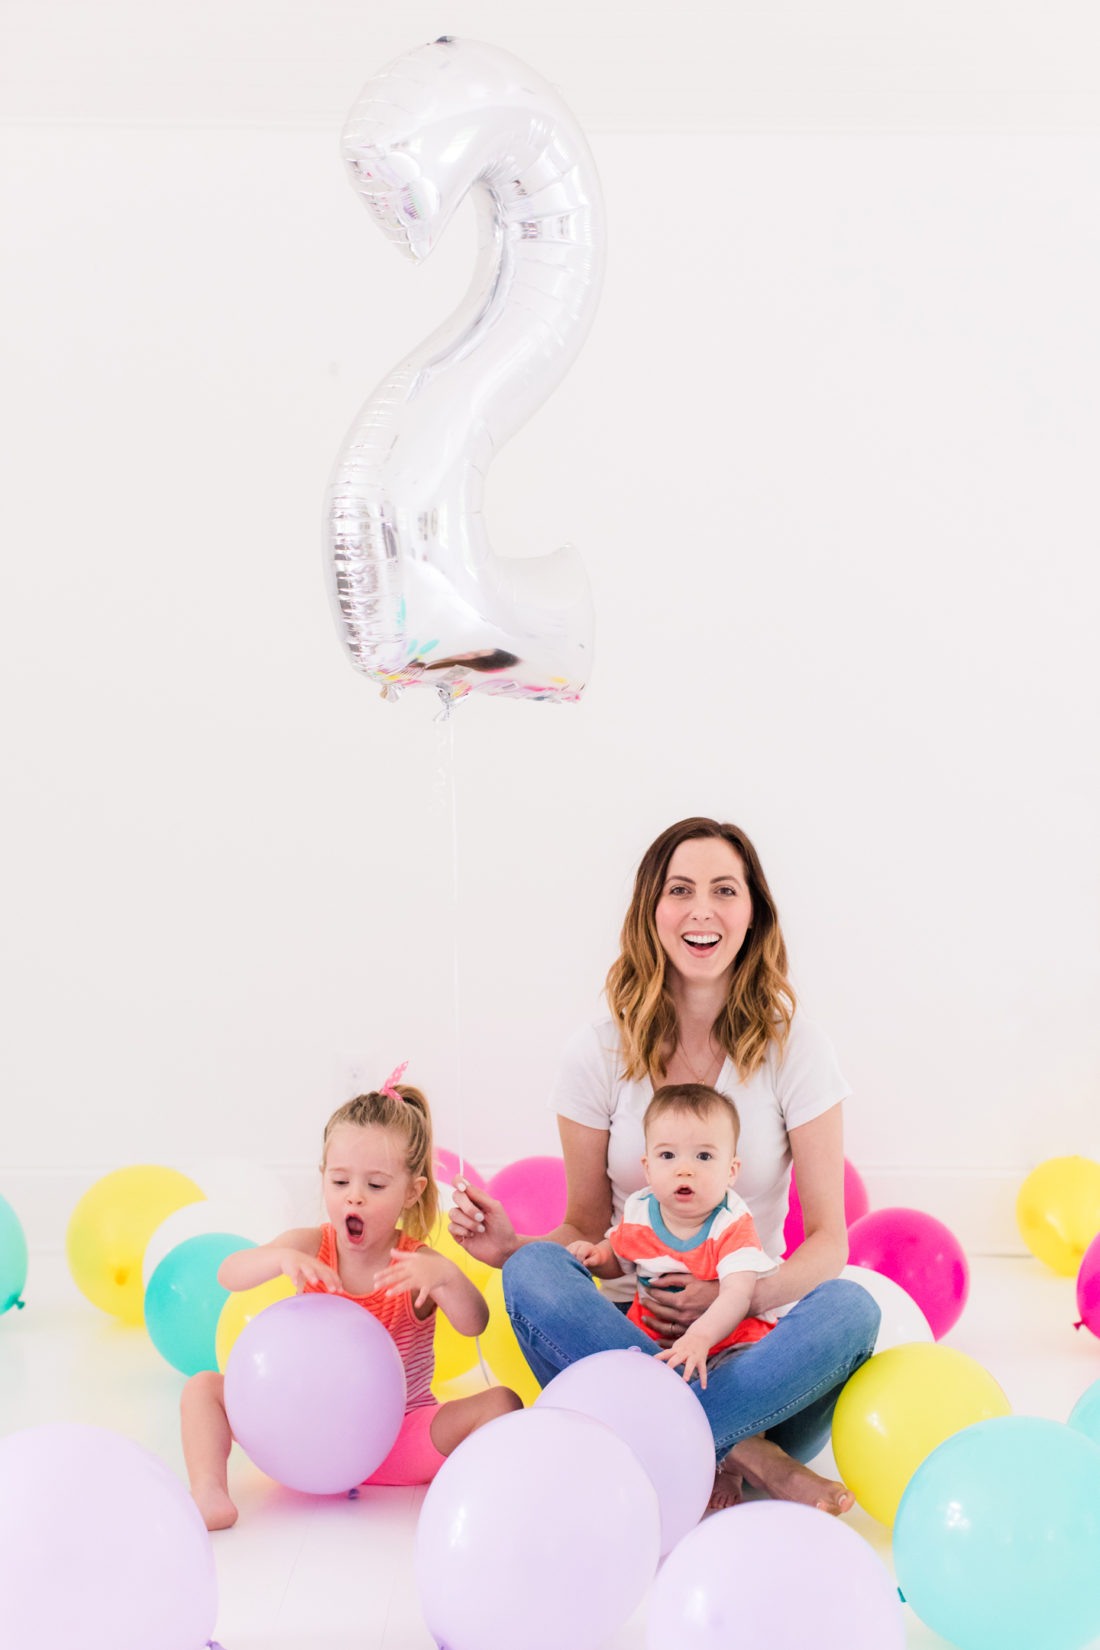 Eva Amurri Martino sits with children Marlowe and Major among tons of multicolored balloons to celebrate the Happily Eva After two year anniversary